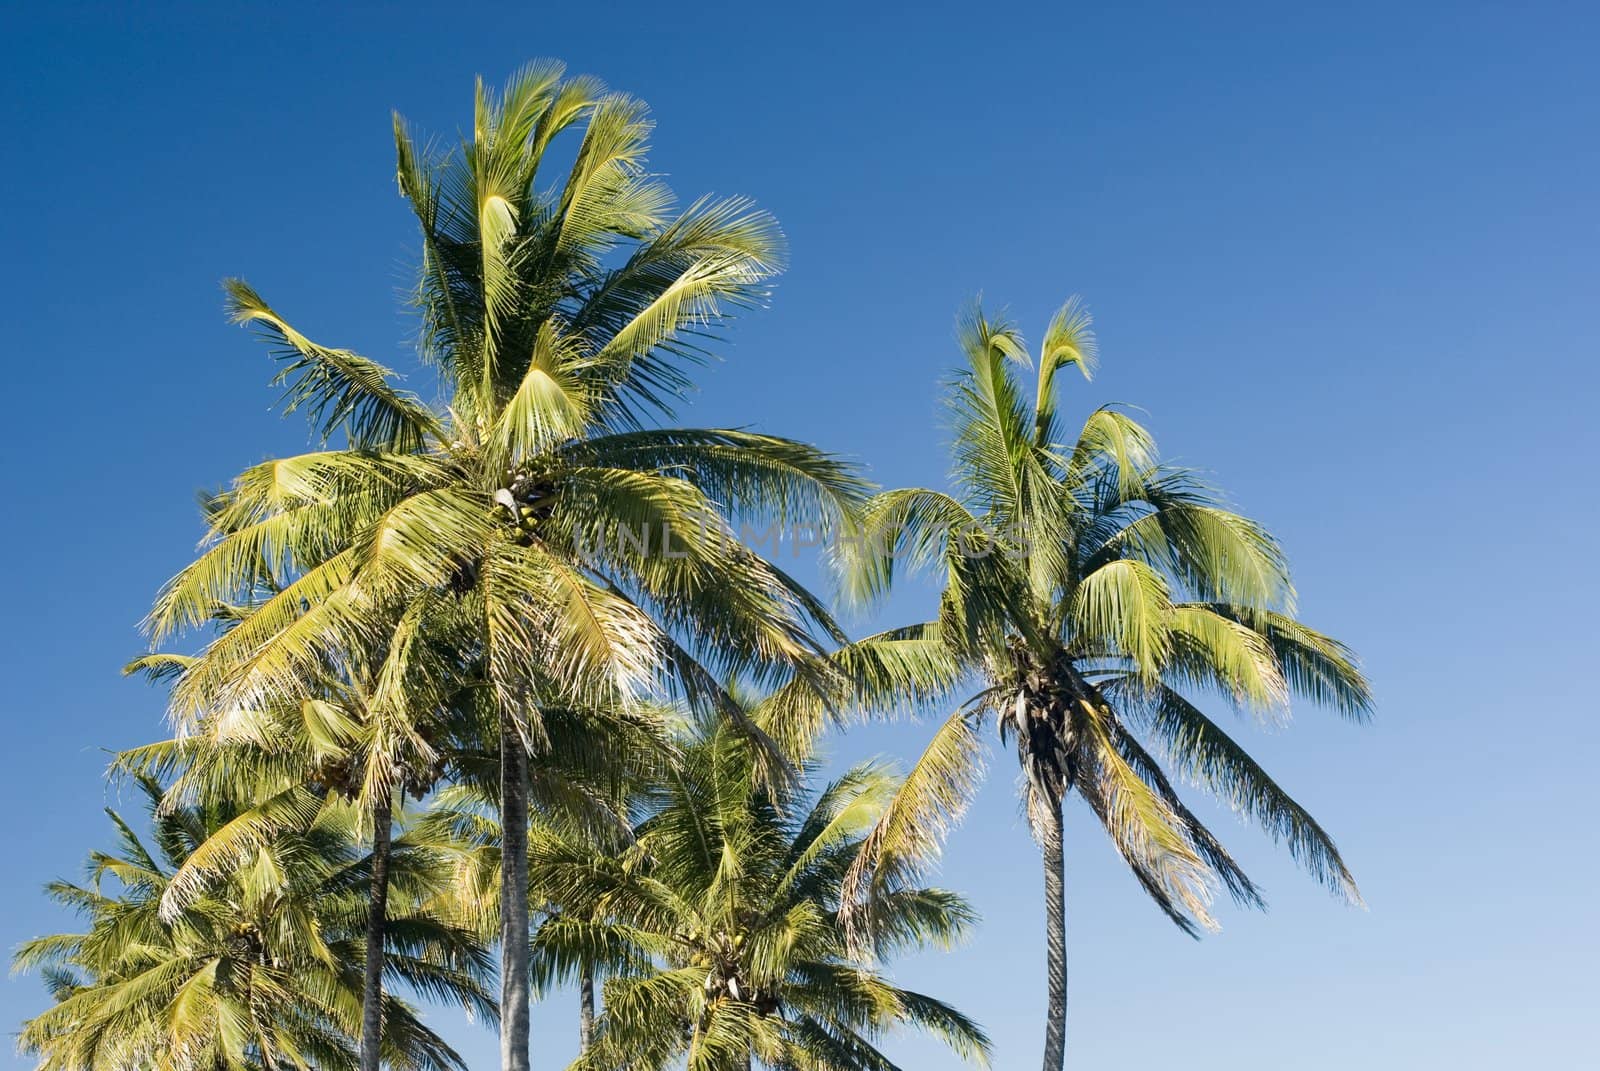 A group of palm trees growing in the tropical climate of the Whitsunday islands, Queensland, Australia